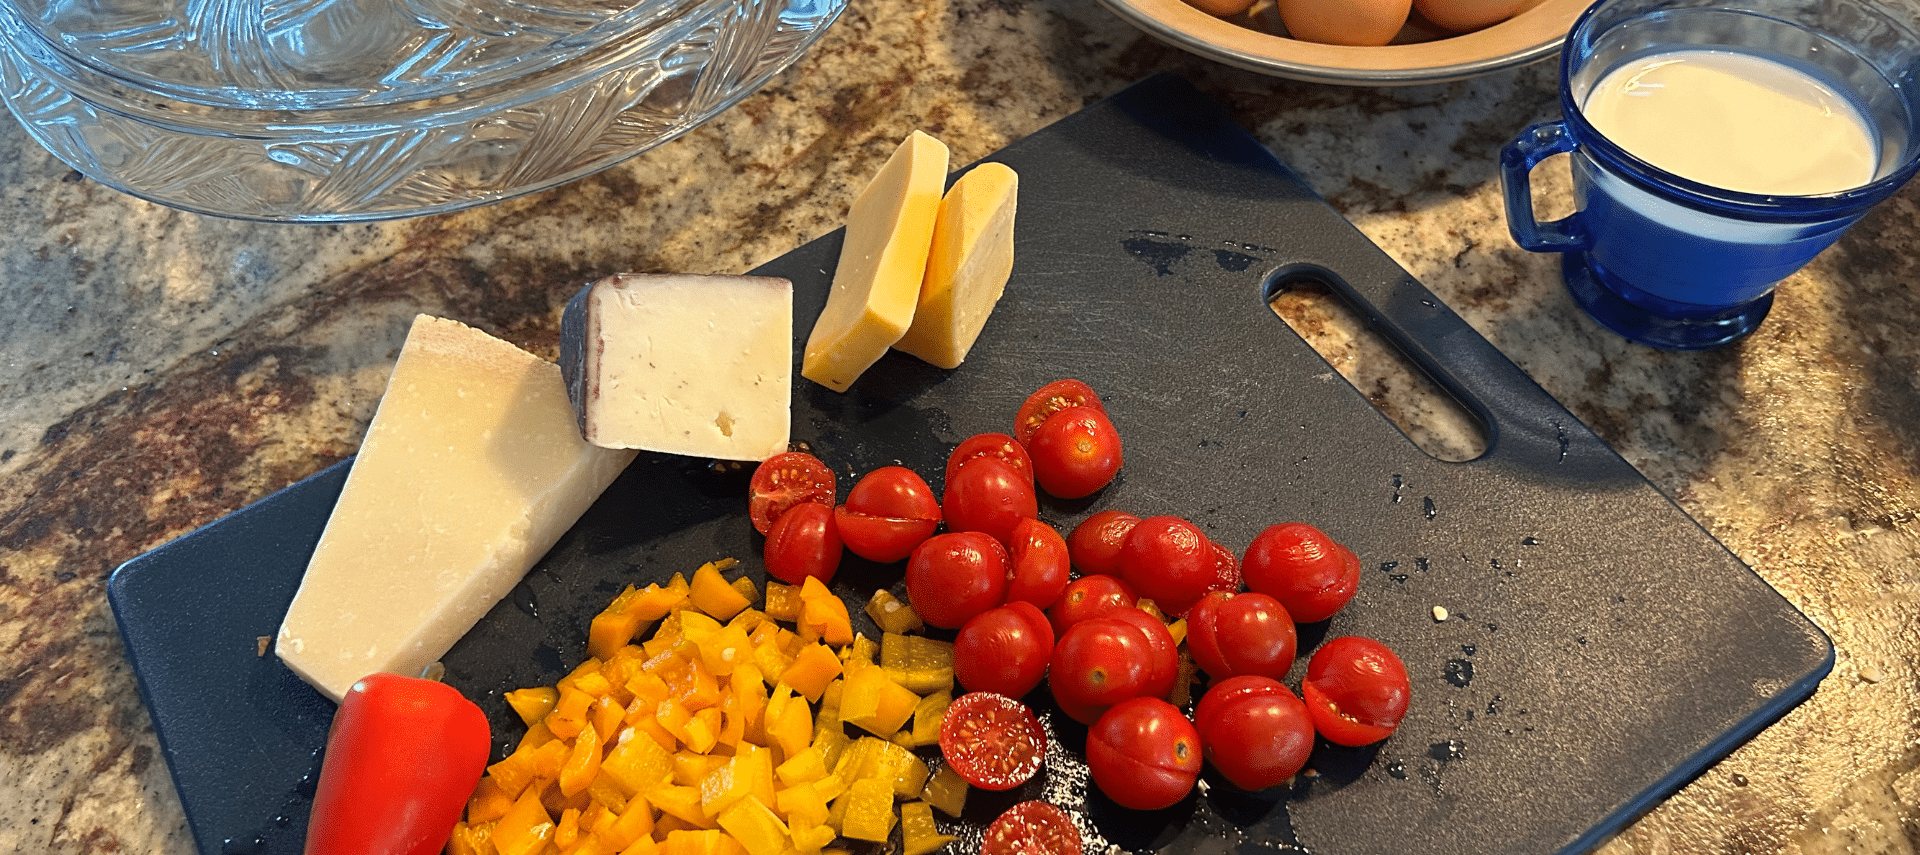 Image of fresh tomato, pepper, and cheese on cutting board showcasing Wimberley restaurants food prep